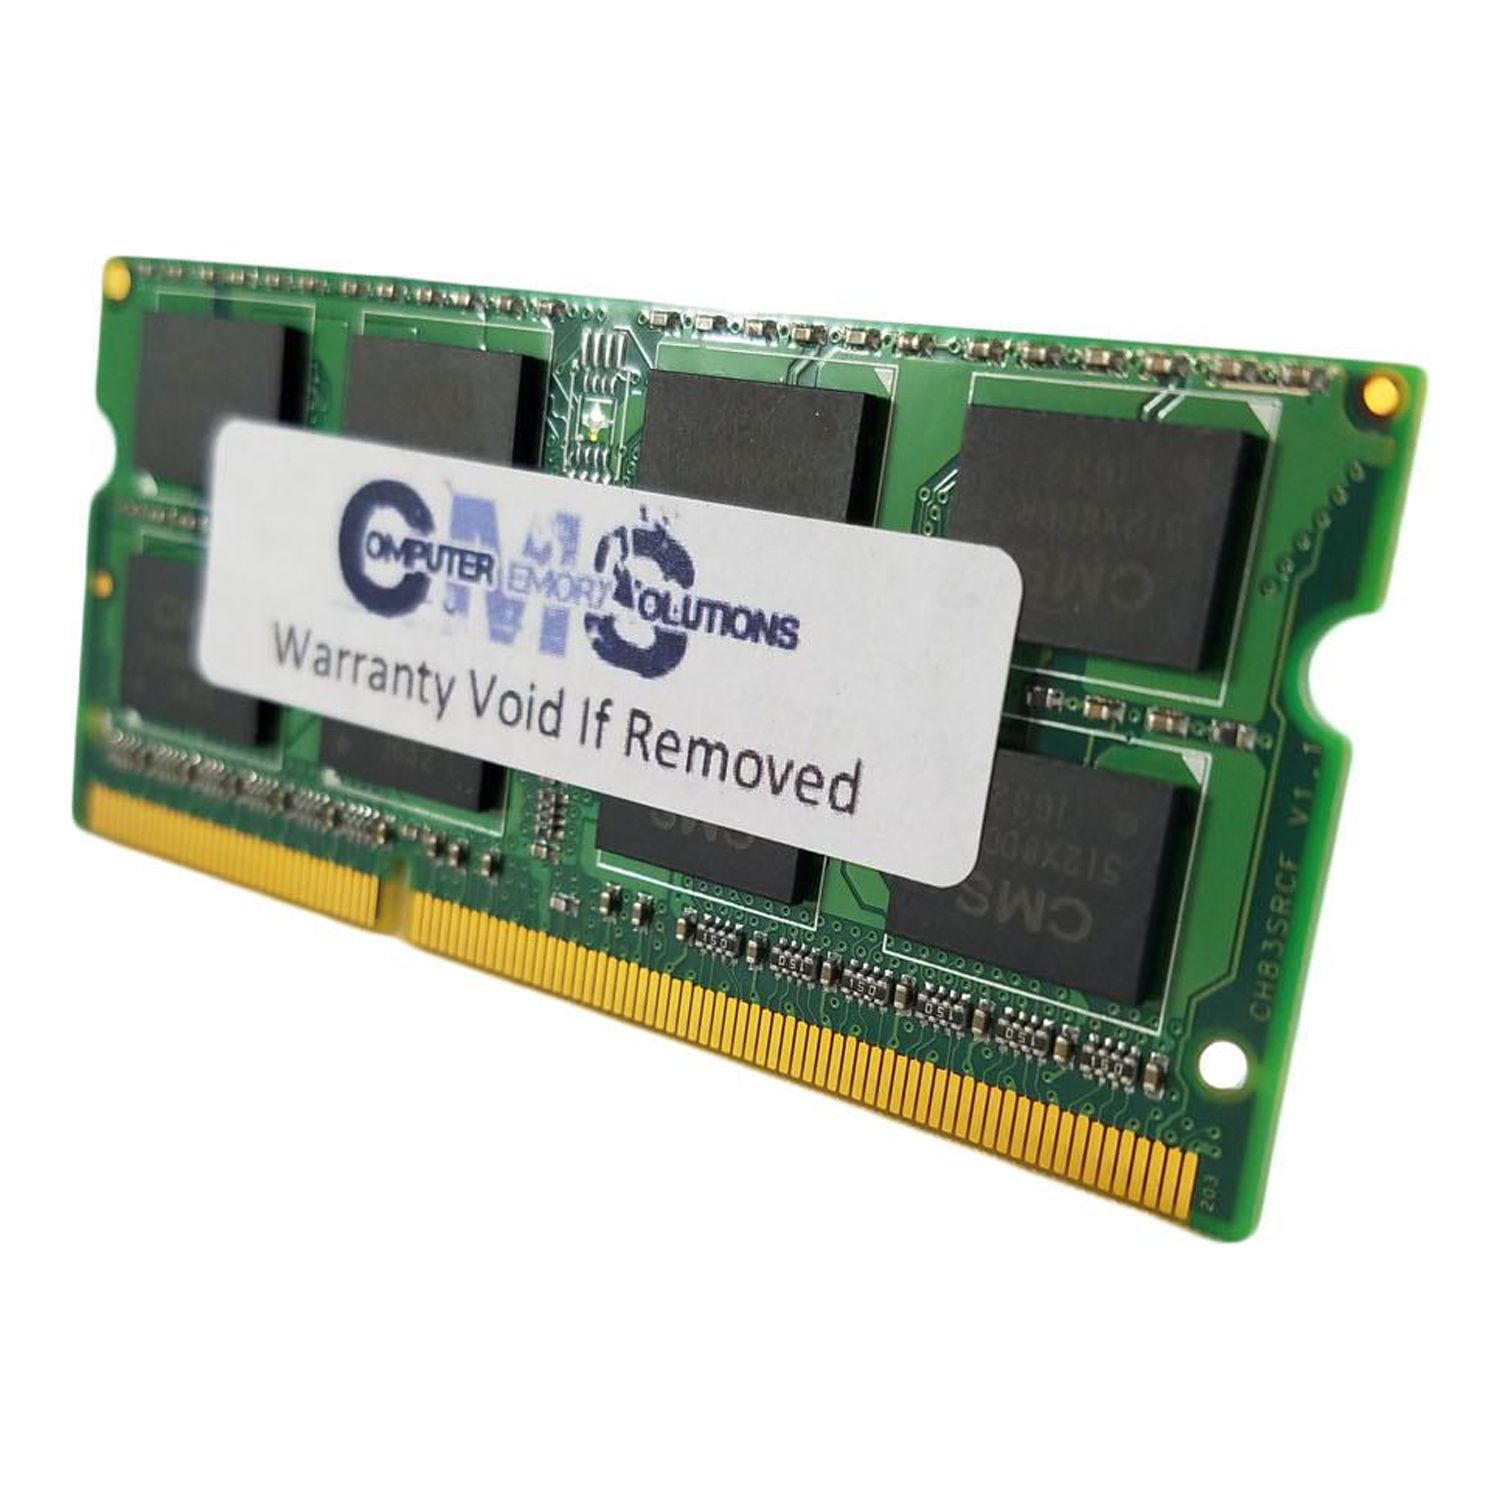 CMS 8GB (1X8GB) DDR3 12800 1600MHz NON ECC SODIMM Memory Ram Upgrade Compatible with Panasonic® Toughbook 52 Mk5 Cf-52 Cf-52S Cf-52T, Cf-52V - A9 - image 3 of 3